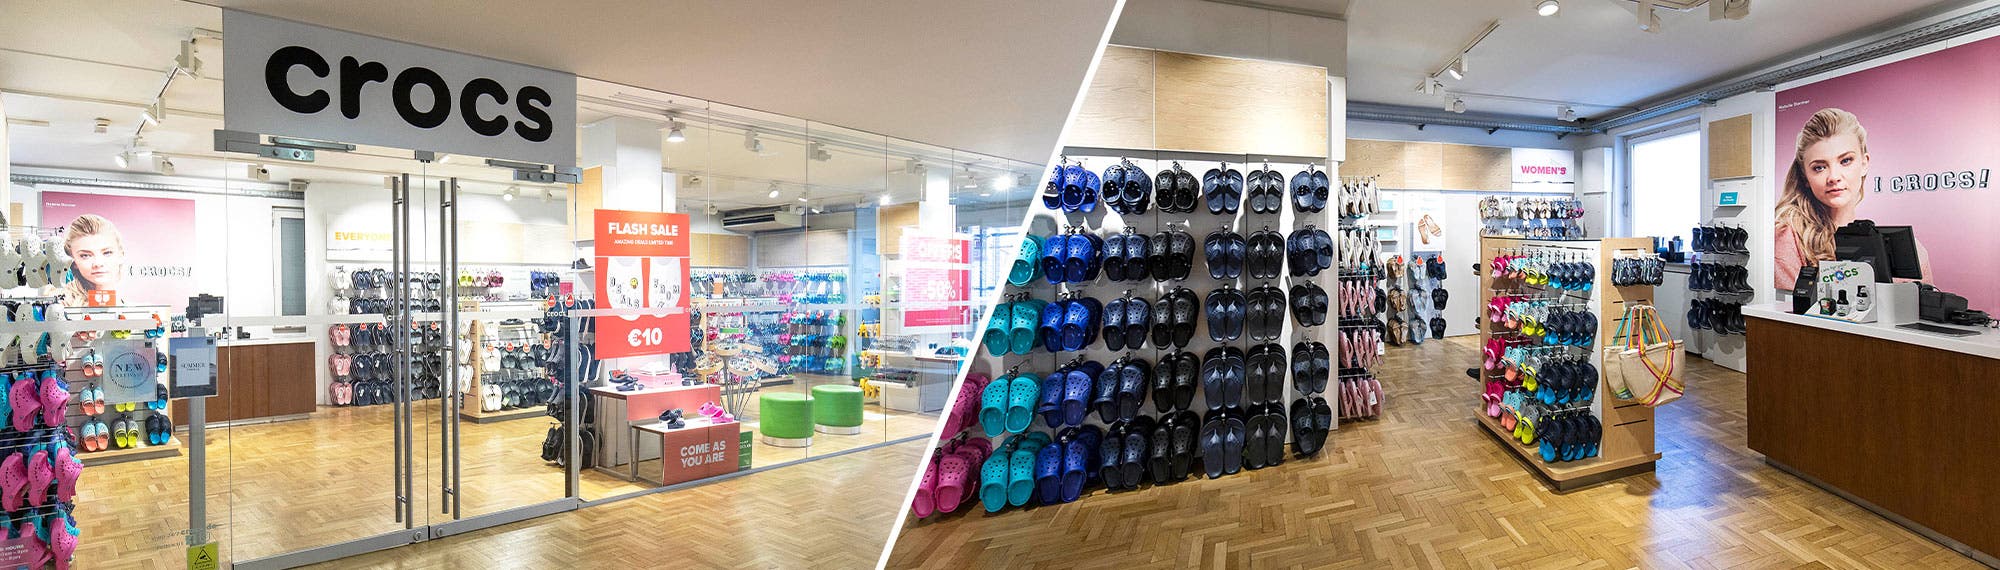 Crocs OUTLET in Germany • Sale up to 70%* off | Outletcity Metzingen